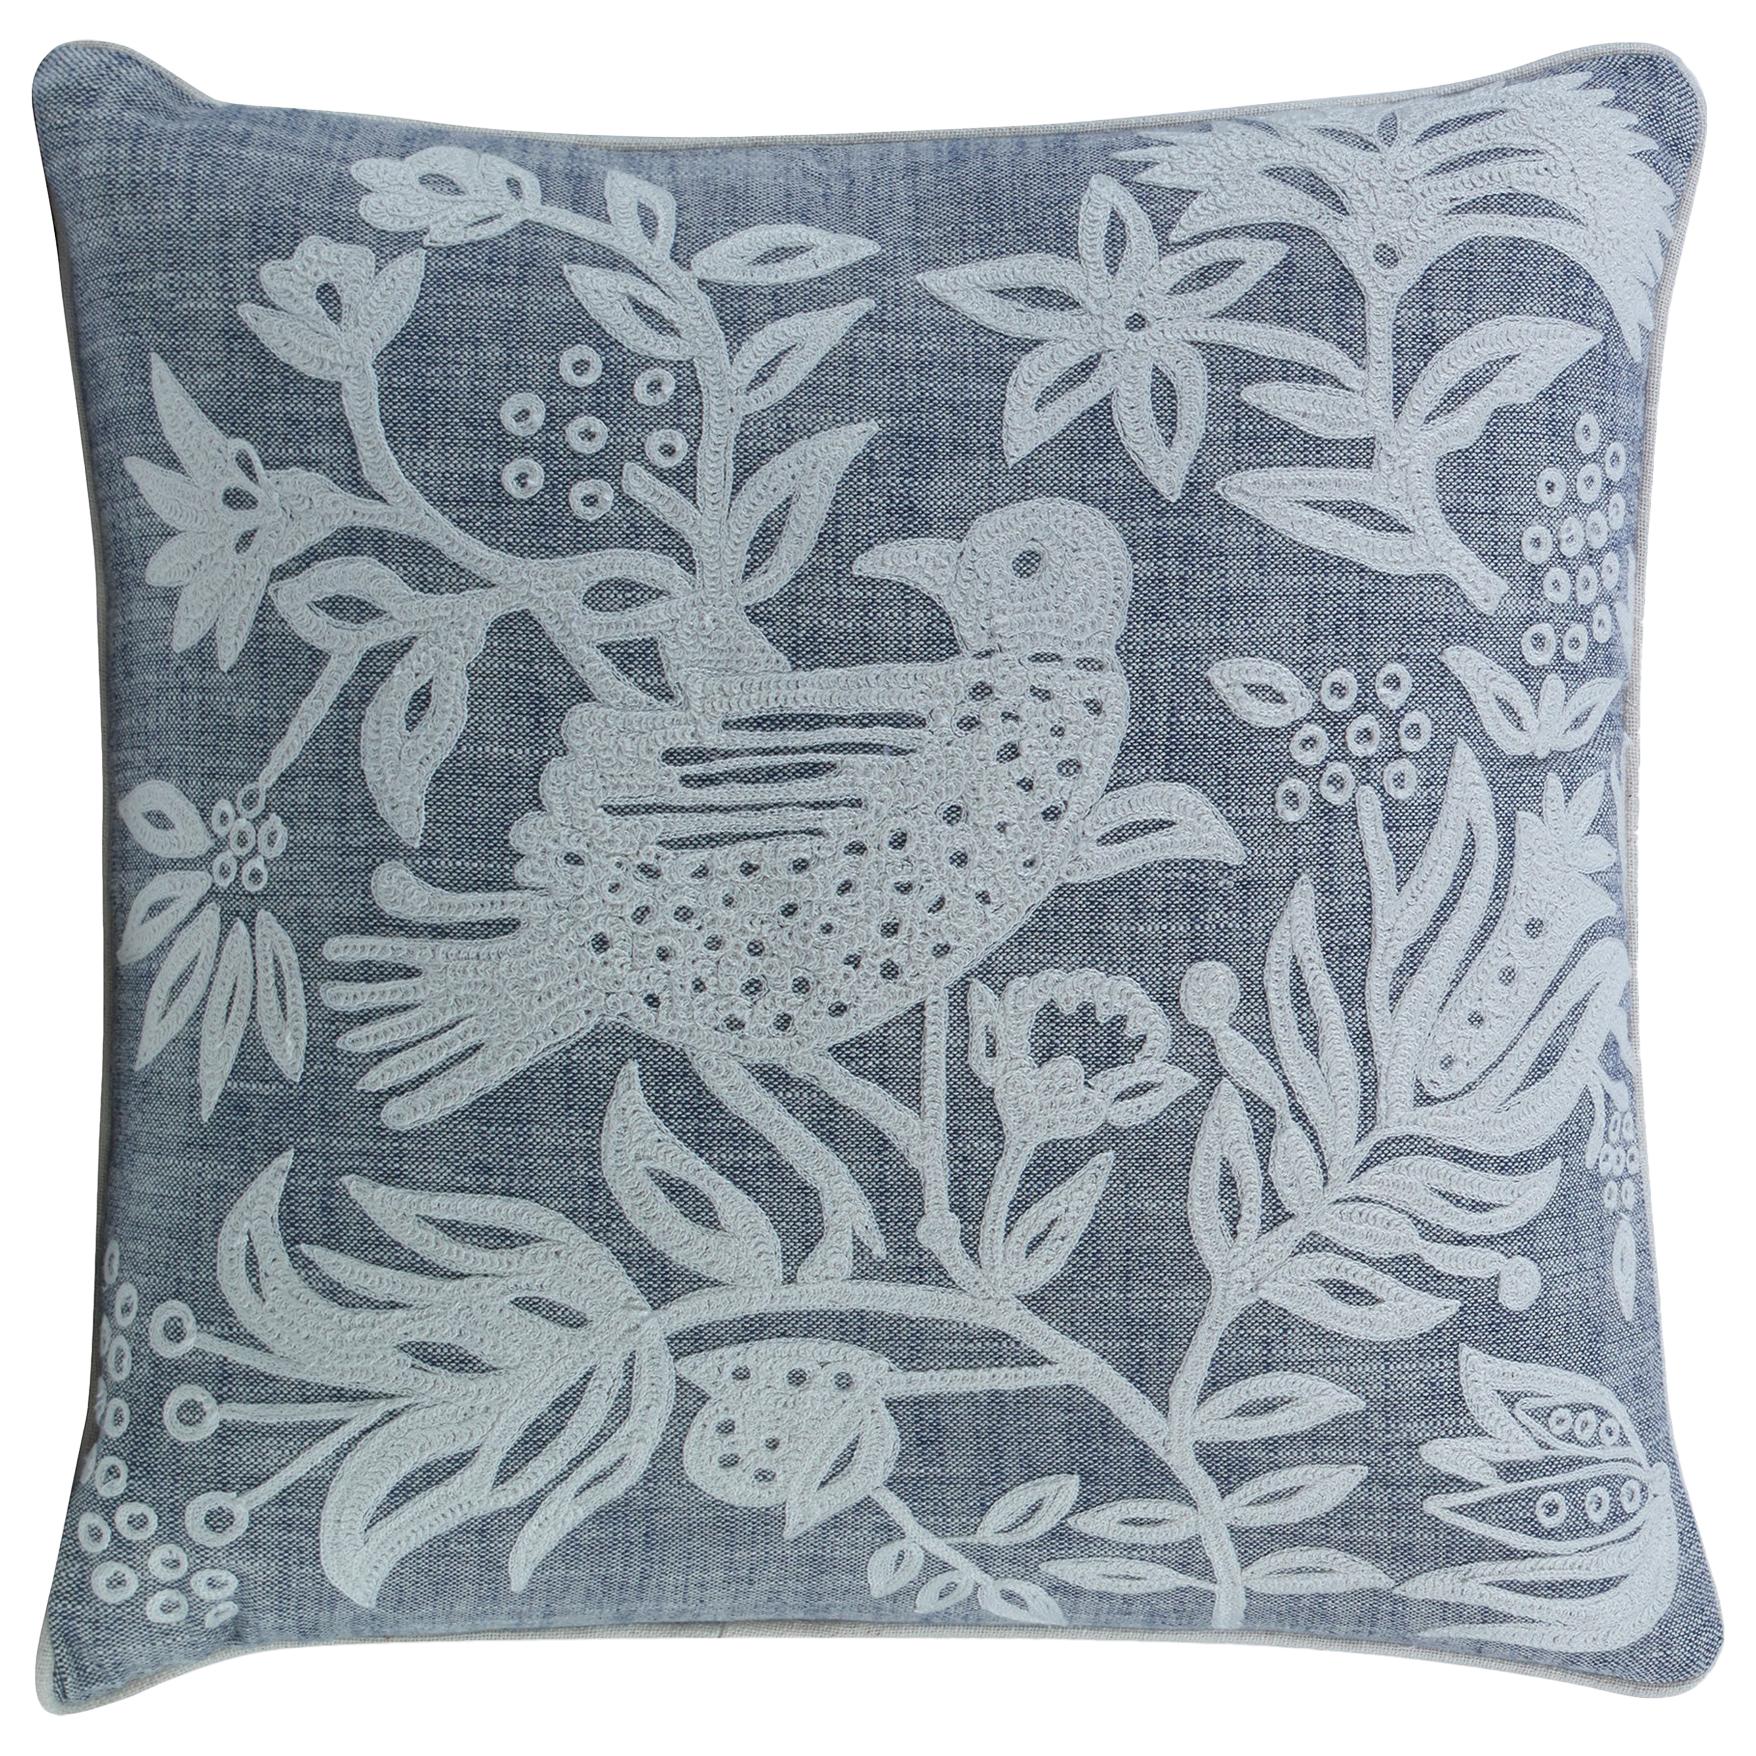 Franklin Hand Embroidered Accent Pillow with Bird Motif by Curatedkravet